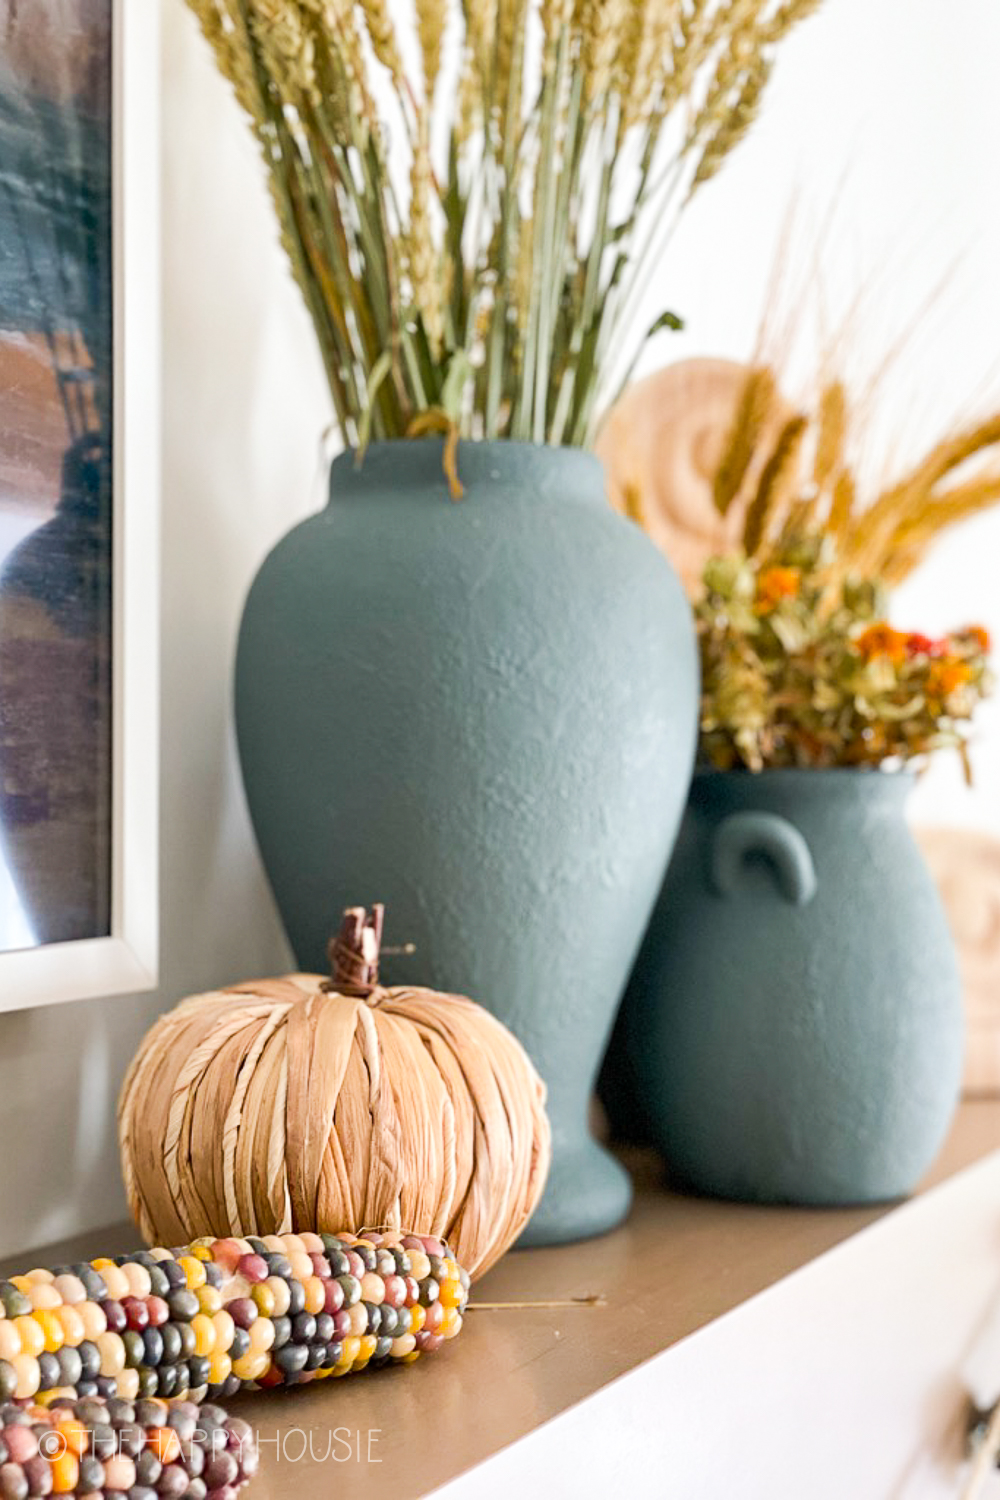 A corn husk pumpkin is beside the vases on the mantel.